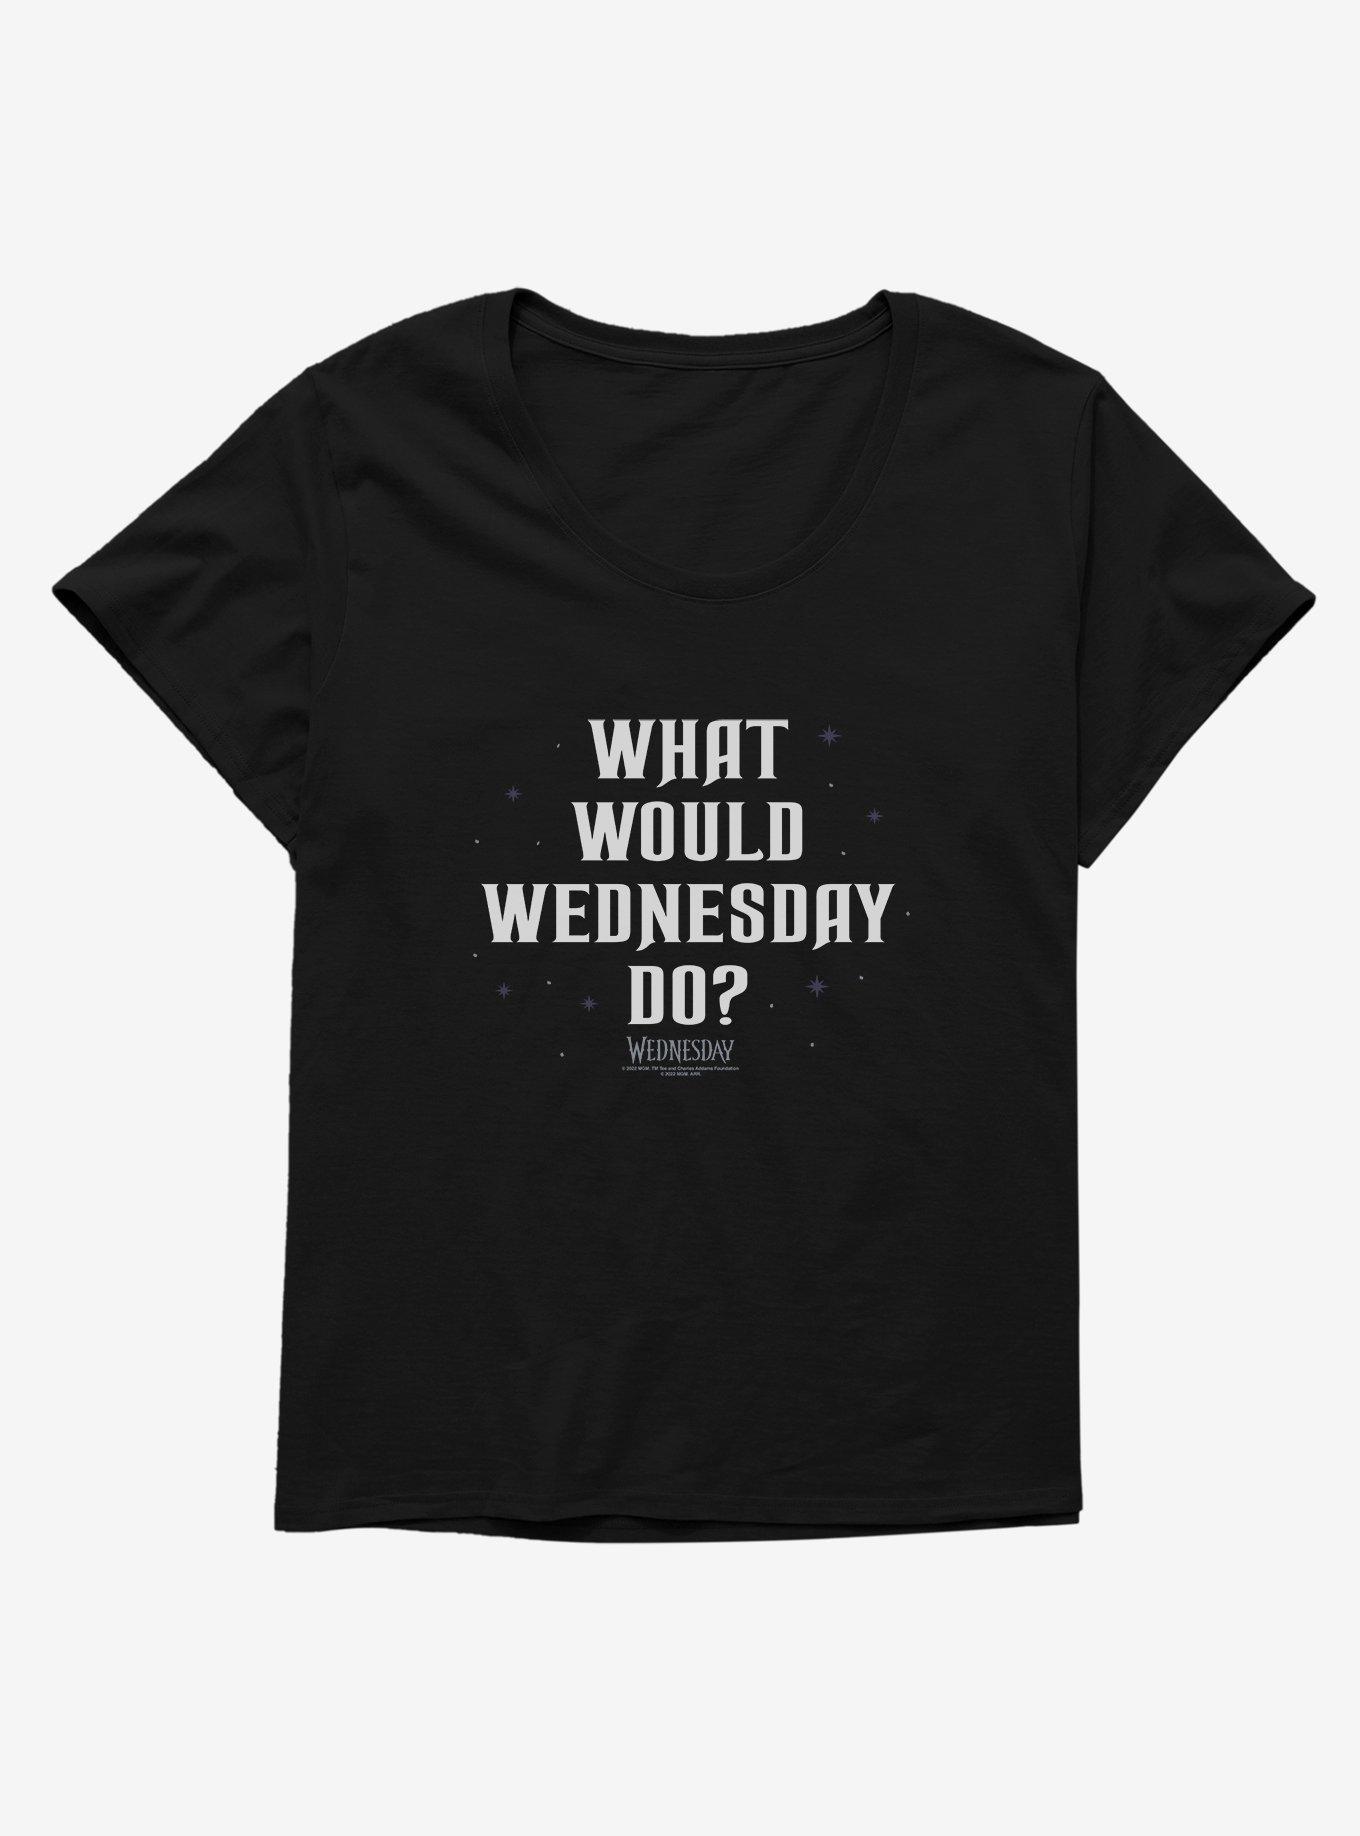 Wednesday What Would Wednesday Do? Womens T-Shirt Plus Size, BLACK, hi-res